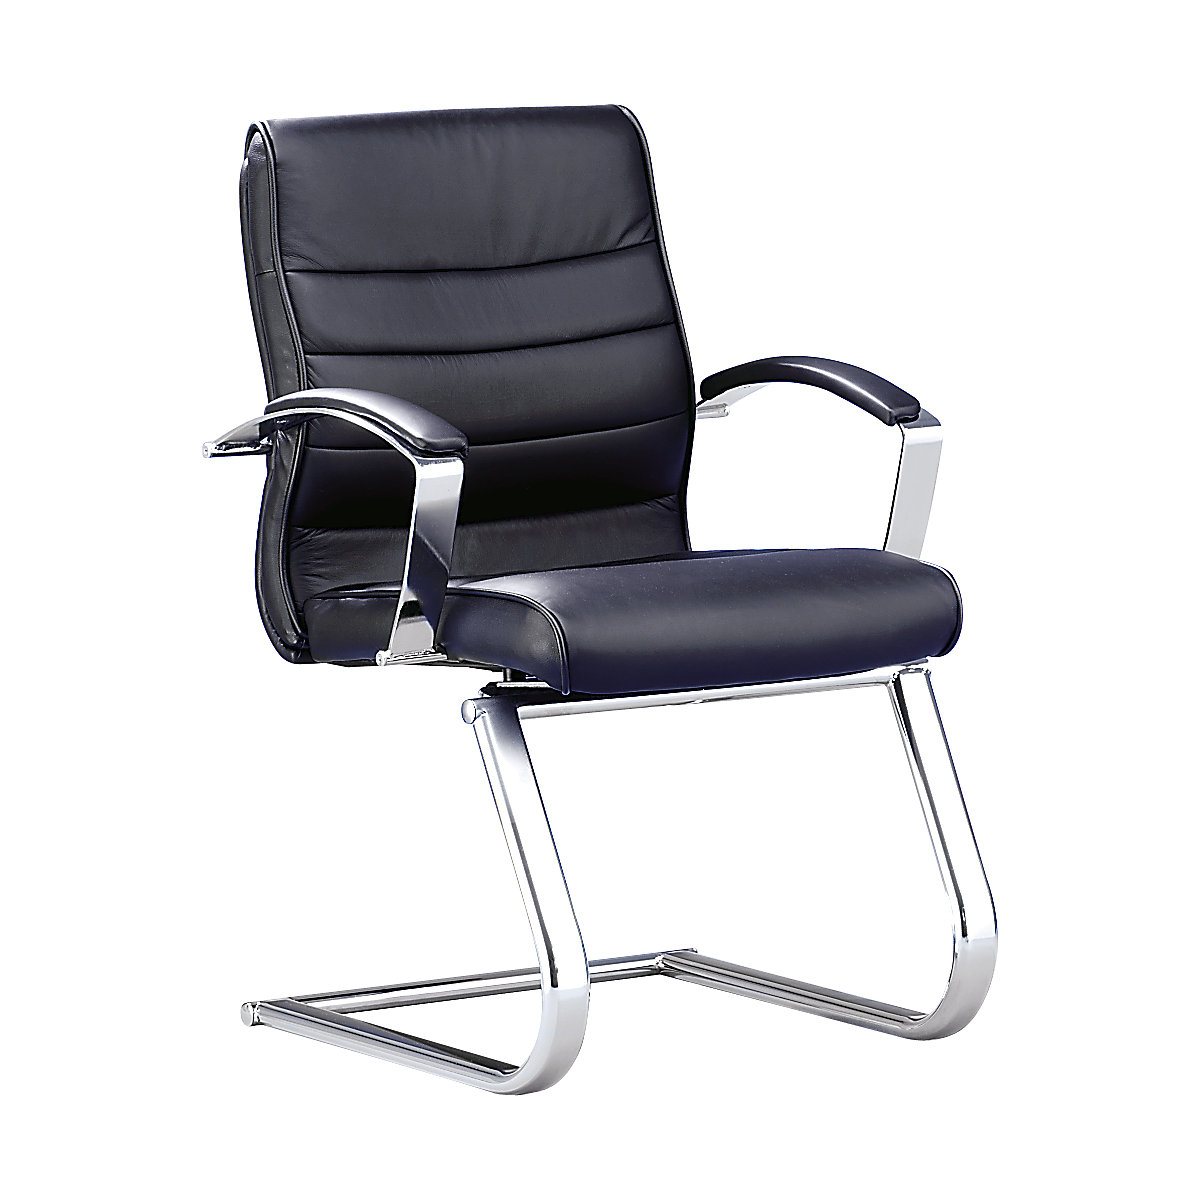 Visitor's easy chair – Topstar